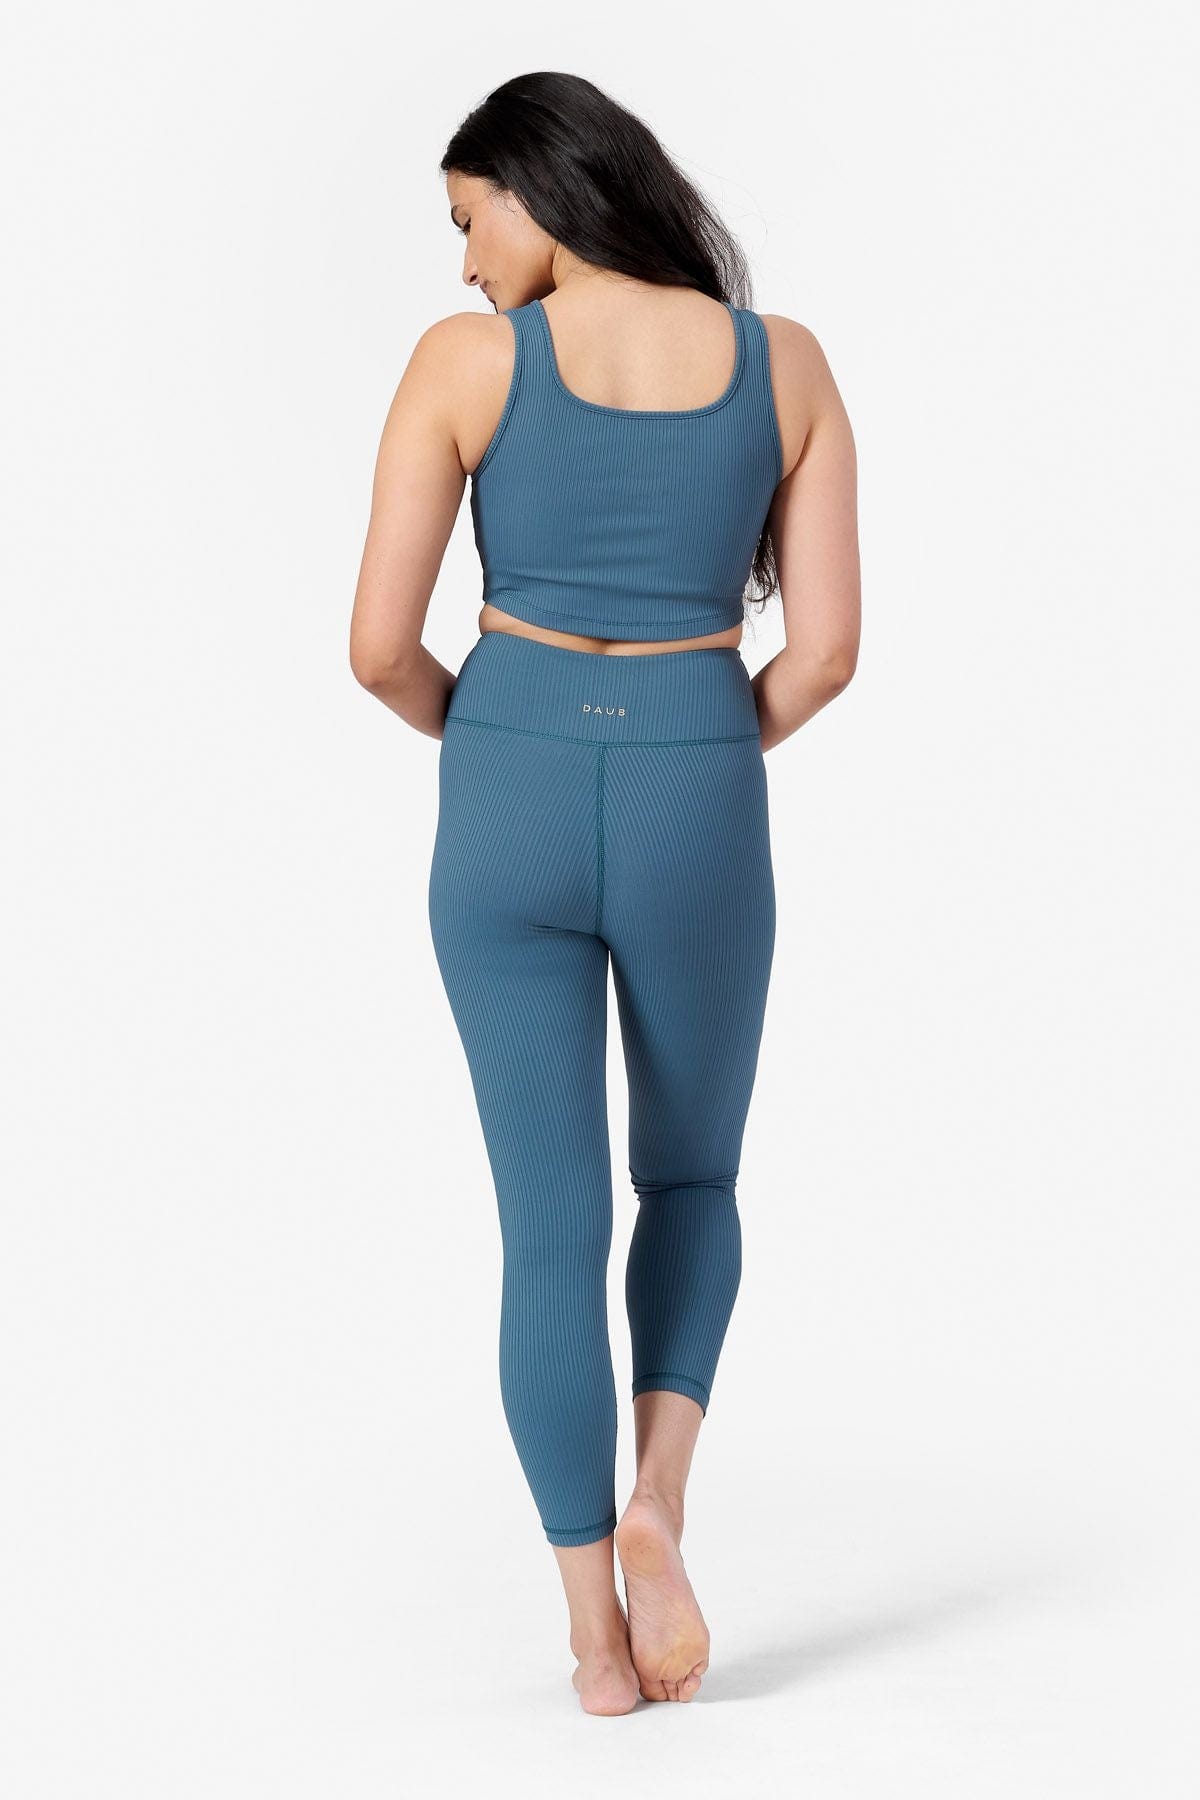 back of woman wearing a ribbed teal bra and teal yoga leggings